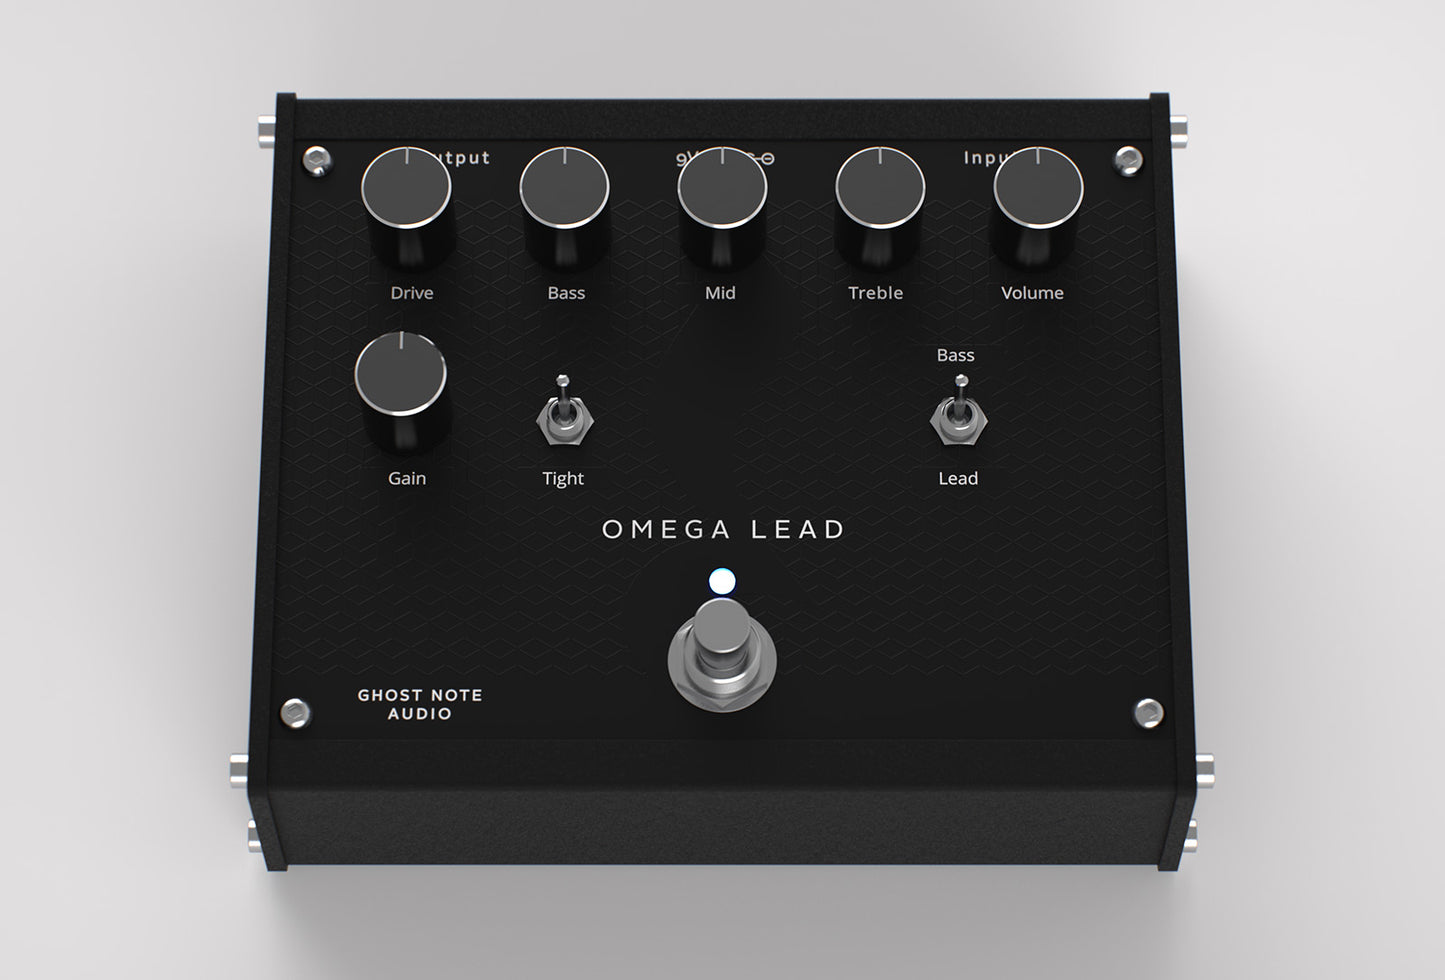 Omega Lead Preamp by Ghost Note Audio - 3D rendering